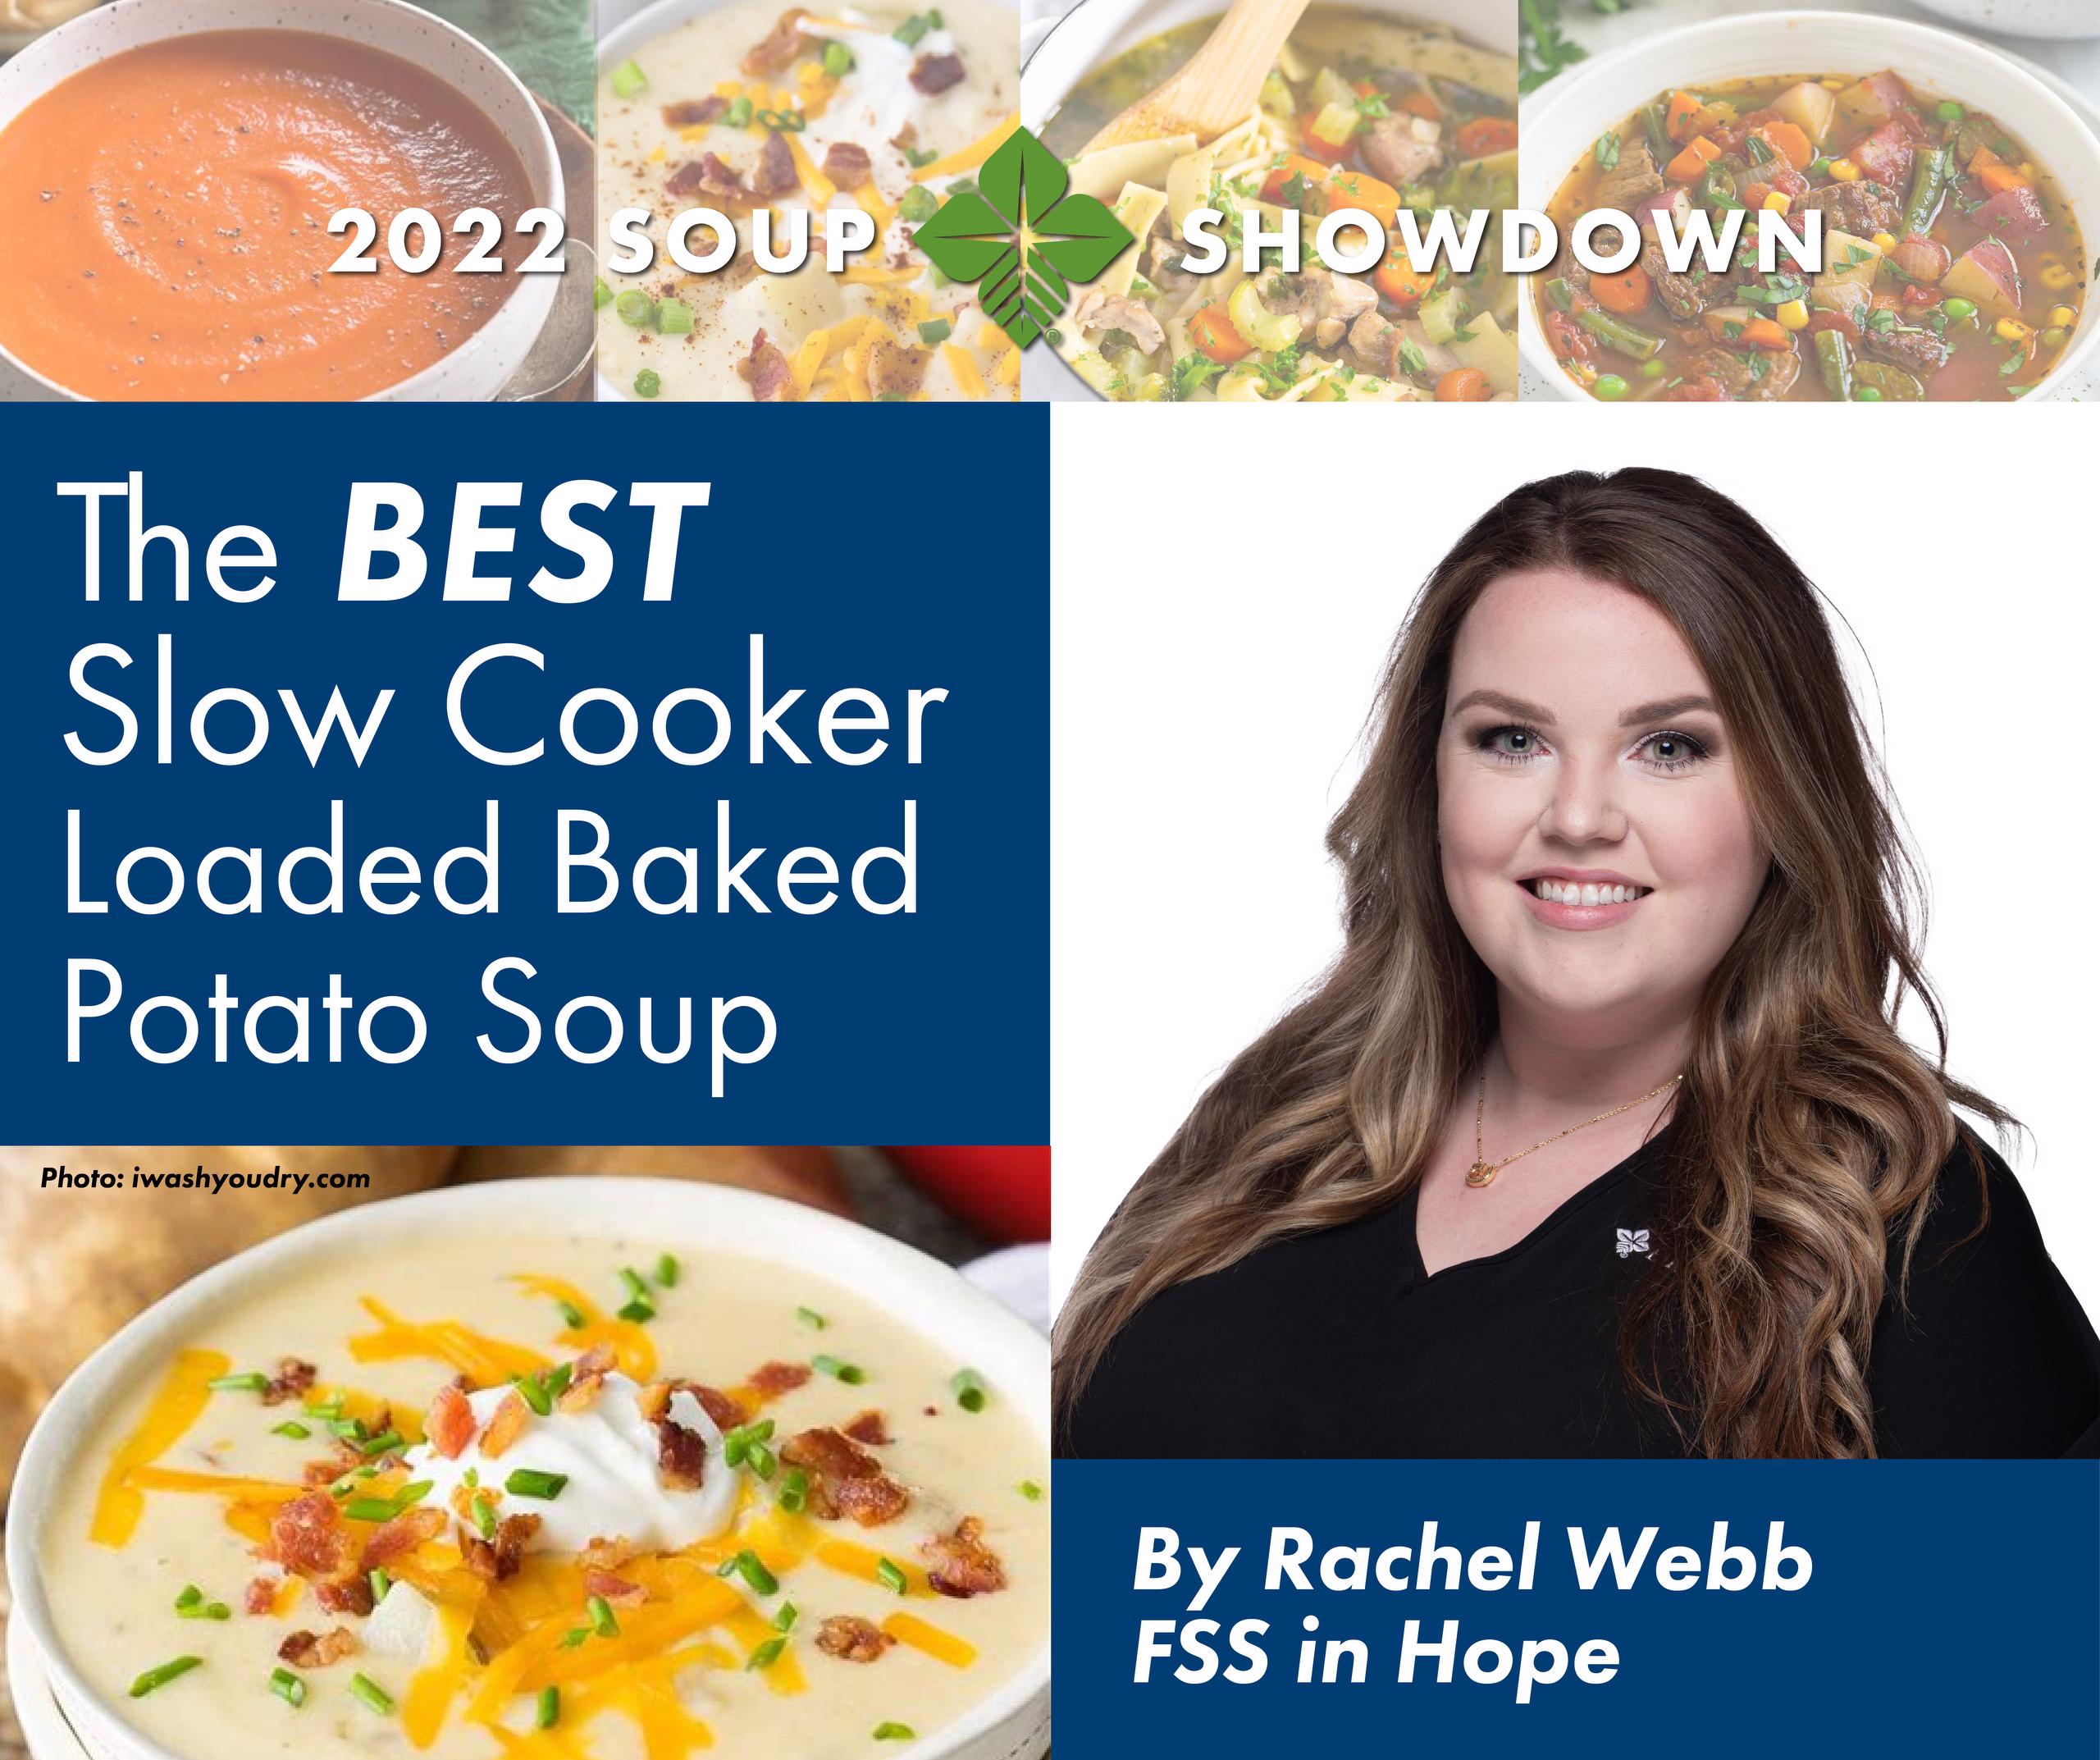 Text reads: 2022 Soup Showdown, The Best Slow Cooker Loaded Baked Potato Soup by Rachel Webb, FSS in Hope. Pictured is header with soup photos, Rachel's headshot, and a bowl of potato soup.